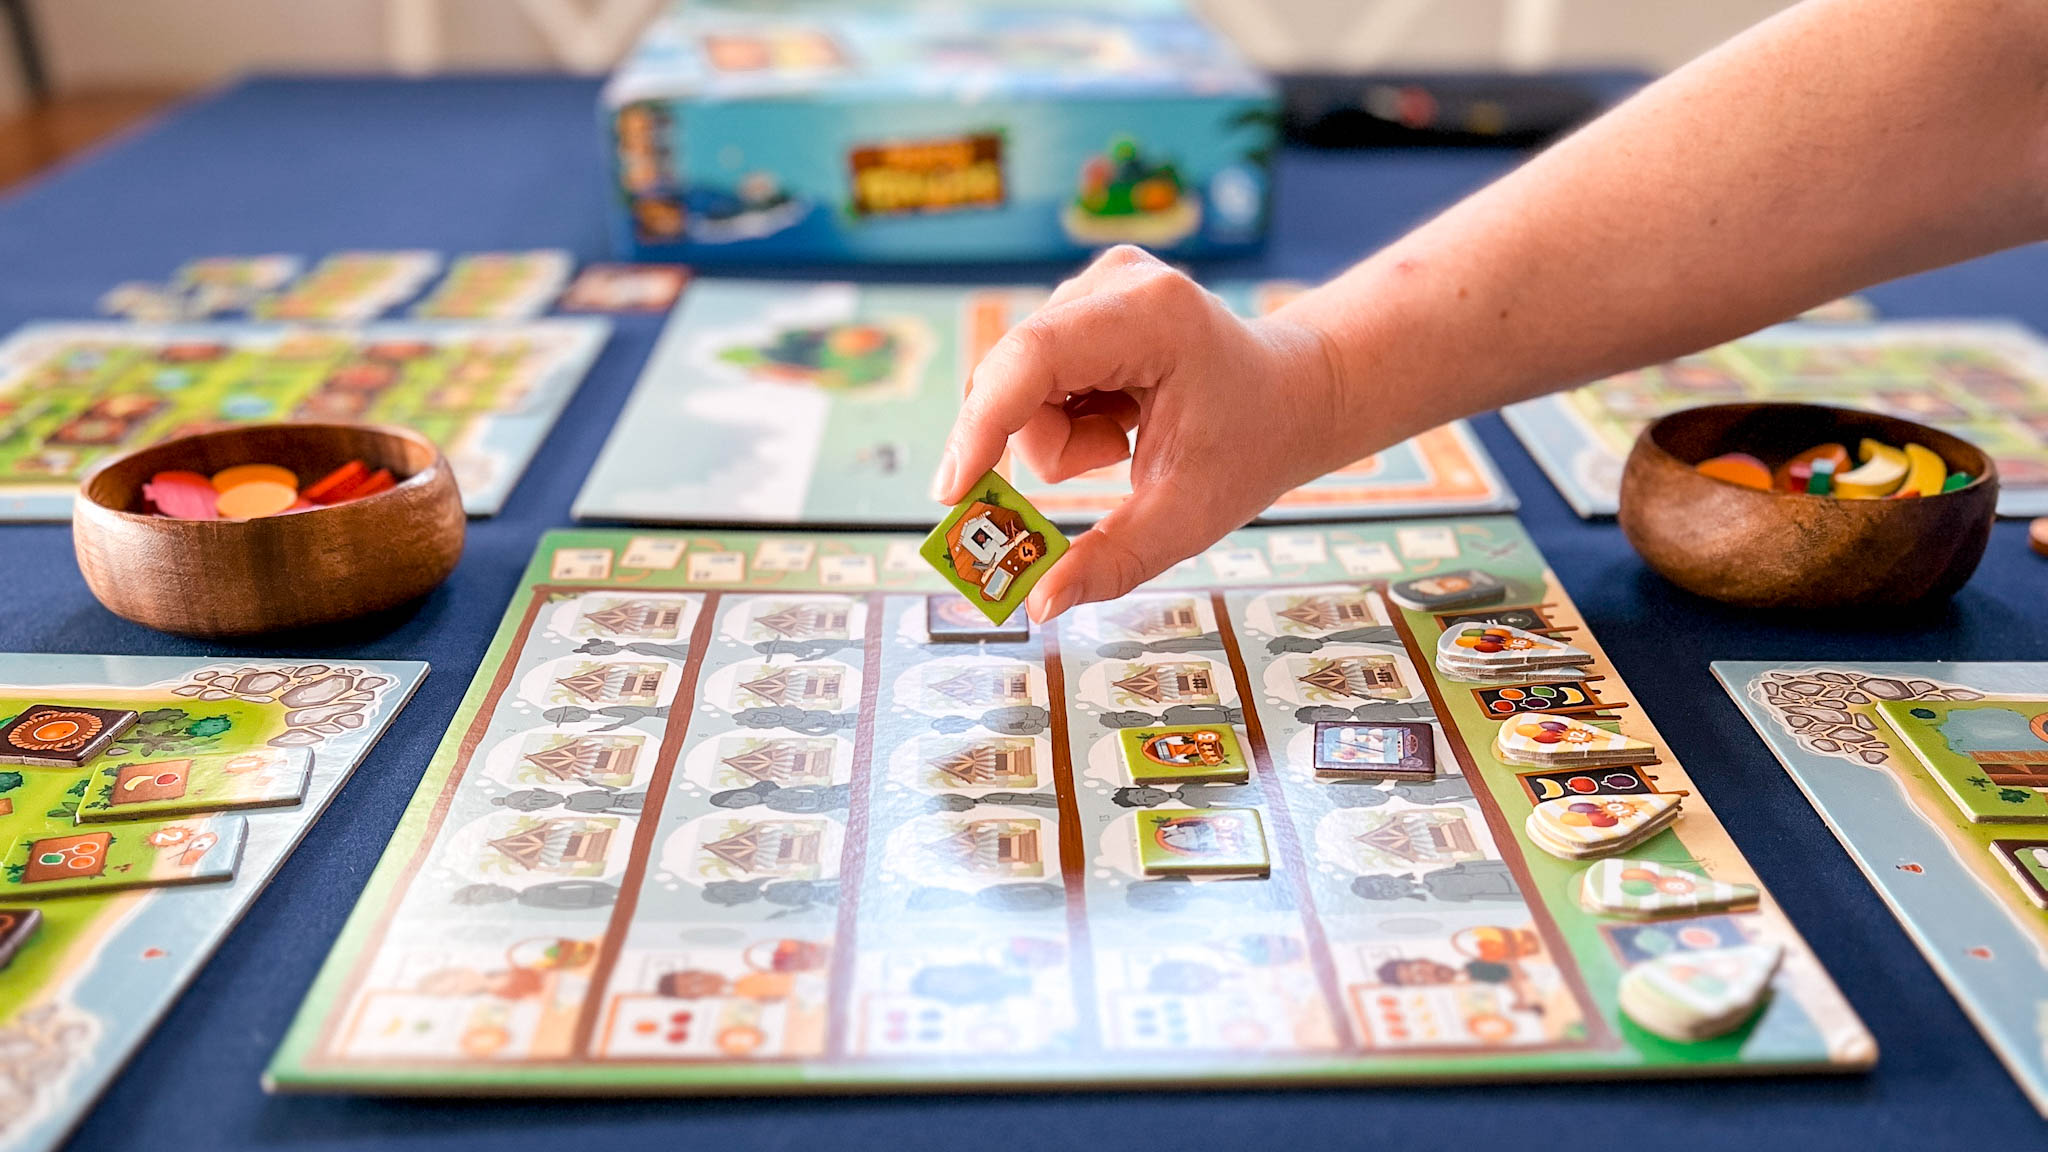 Great Games for 5 Year Olds - The Tabletop Family